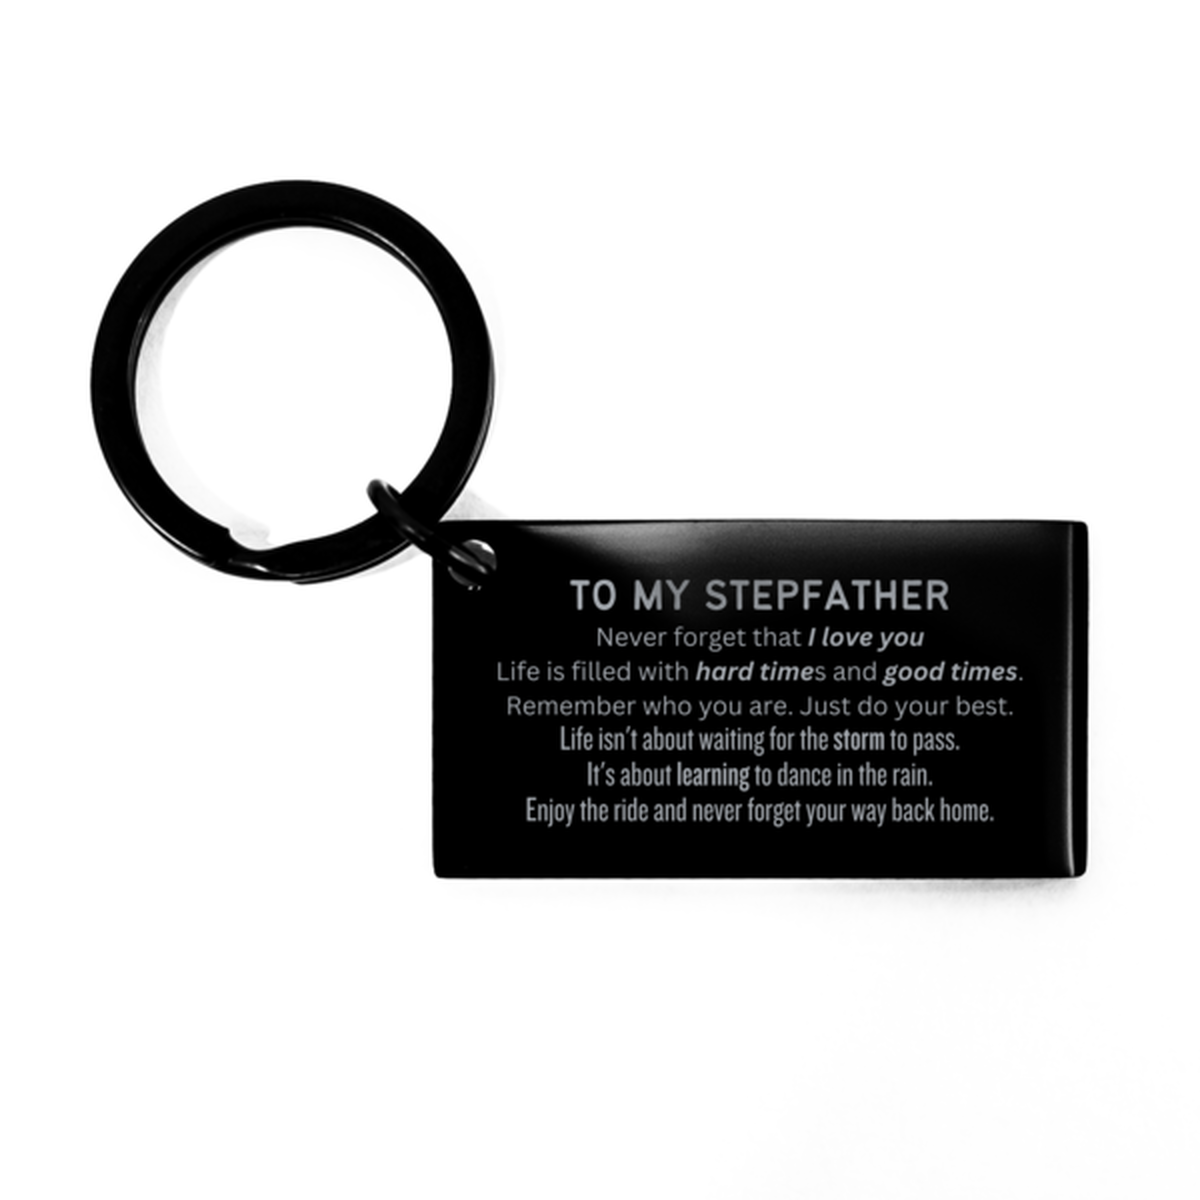 Christmas Stepfather Keychain Gifts, To My Stepfather Birthday Thank You Gifts For Stepfather, Graduation Unique Gifts For Stepfather To My Stepfather Never forget that I love you life is filled with hard times and good times. Remember who you are. Just d